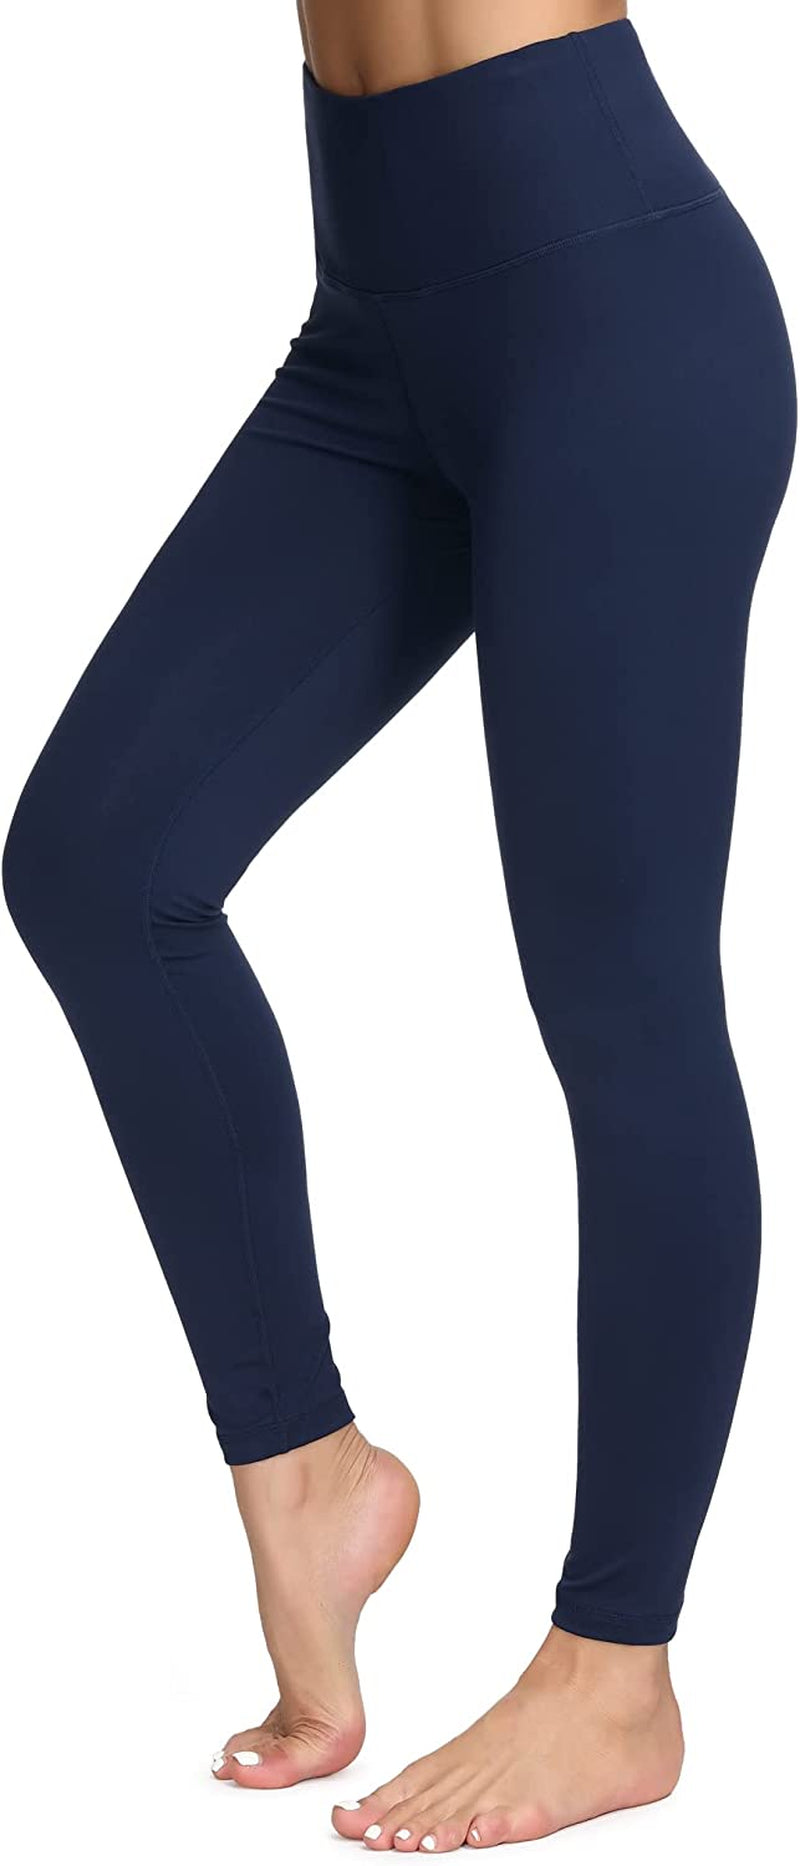 Dragon Fit Compression Yoga Pants with Inner Pockets in High Waist